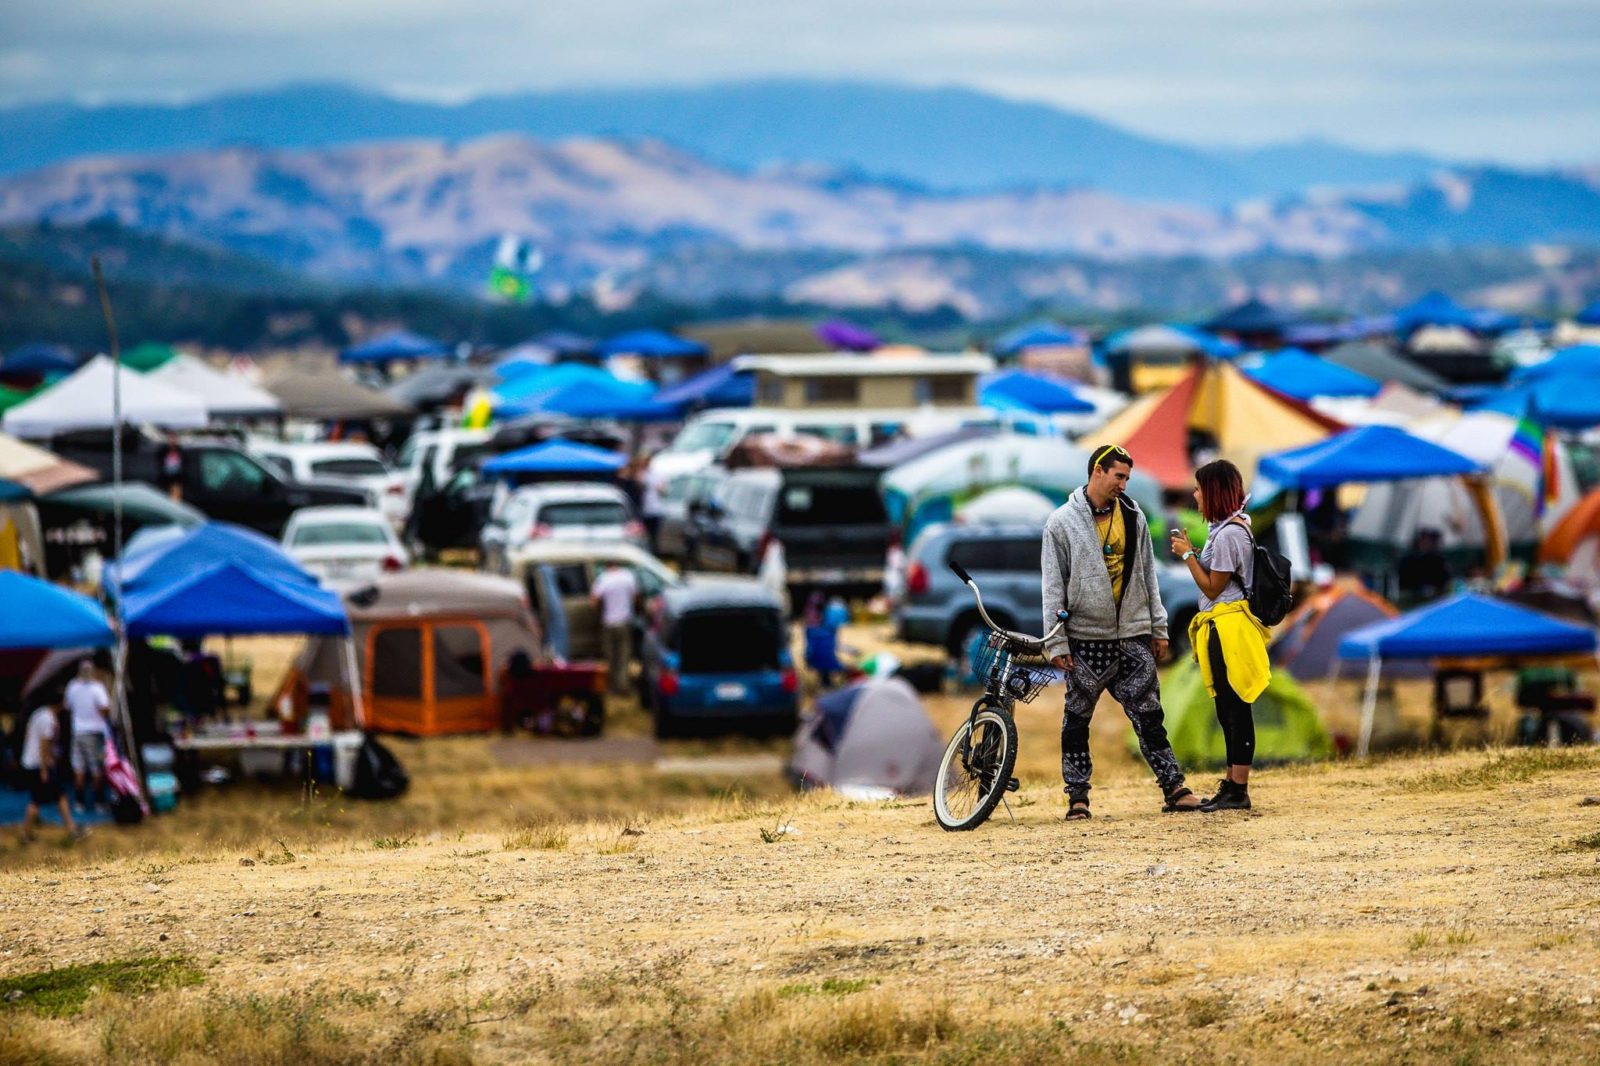 Camping At A Festival And What To Bring The Festival Voice